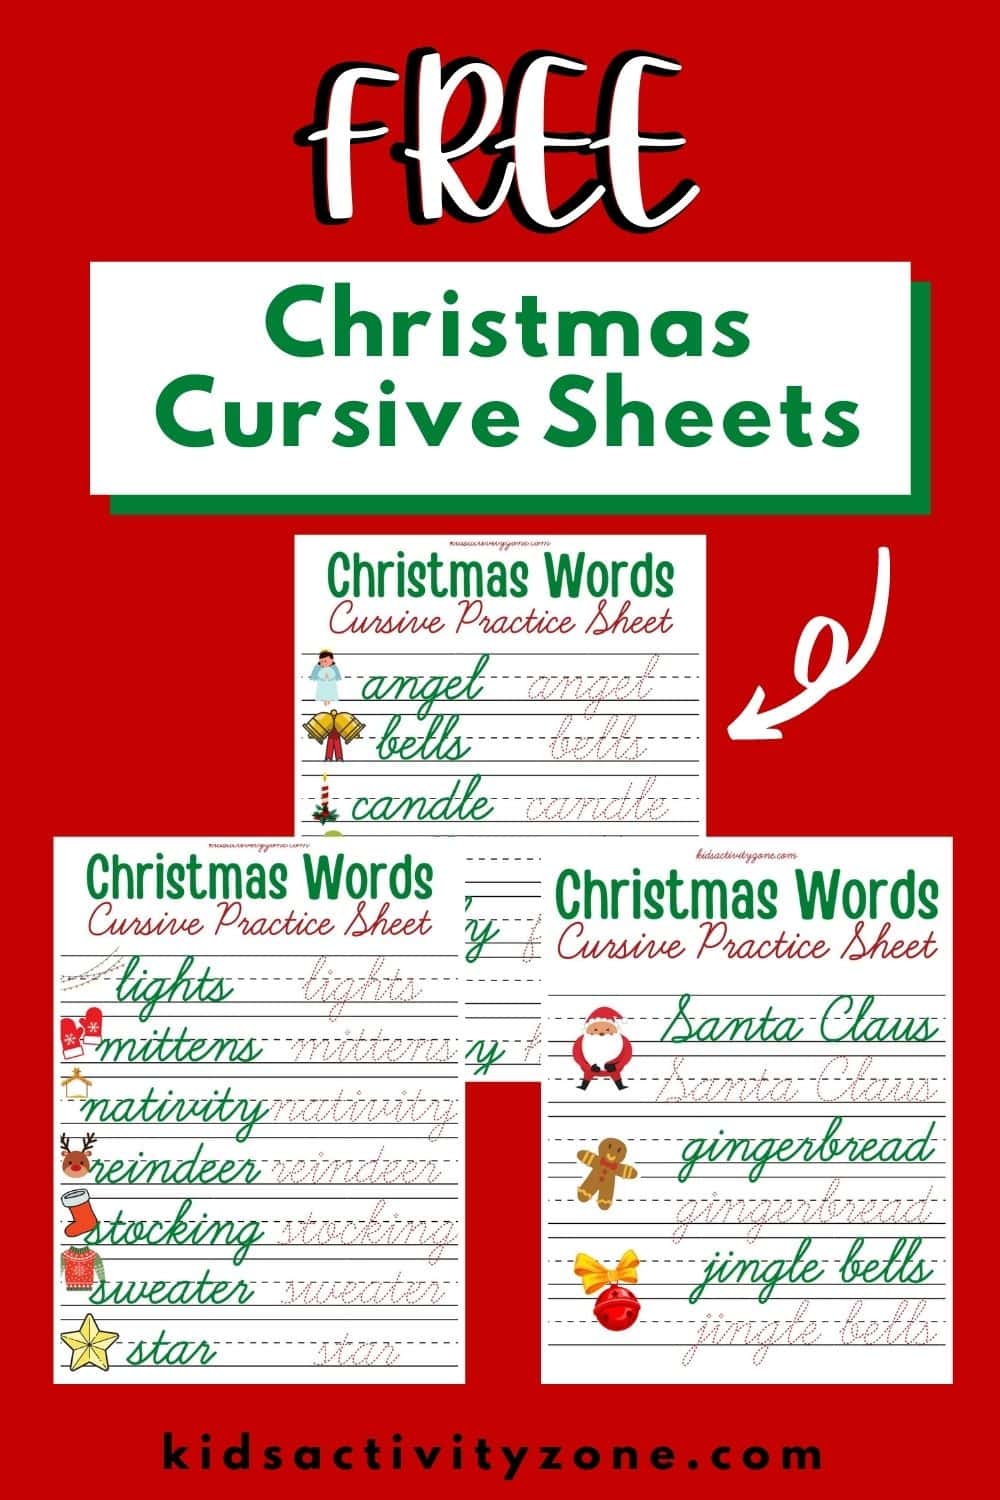 Christmas Words Cursive Practice Sheets is a fun and easy way for kids to practice their cursive handwriting. These free printable worksheets are a fun holiday activity that combines spelling and cursive practice. 